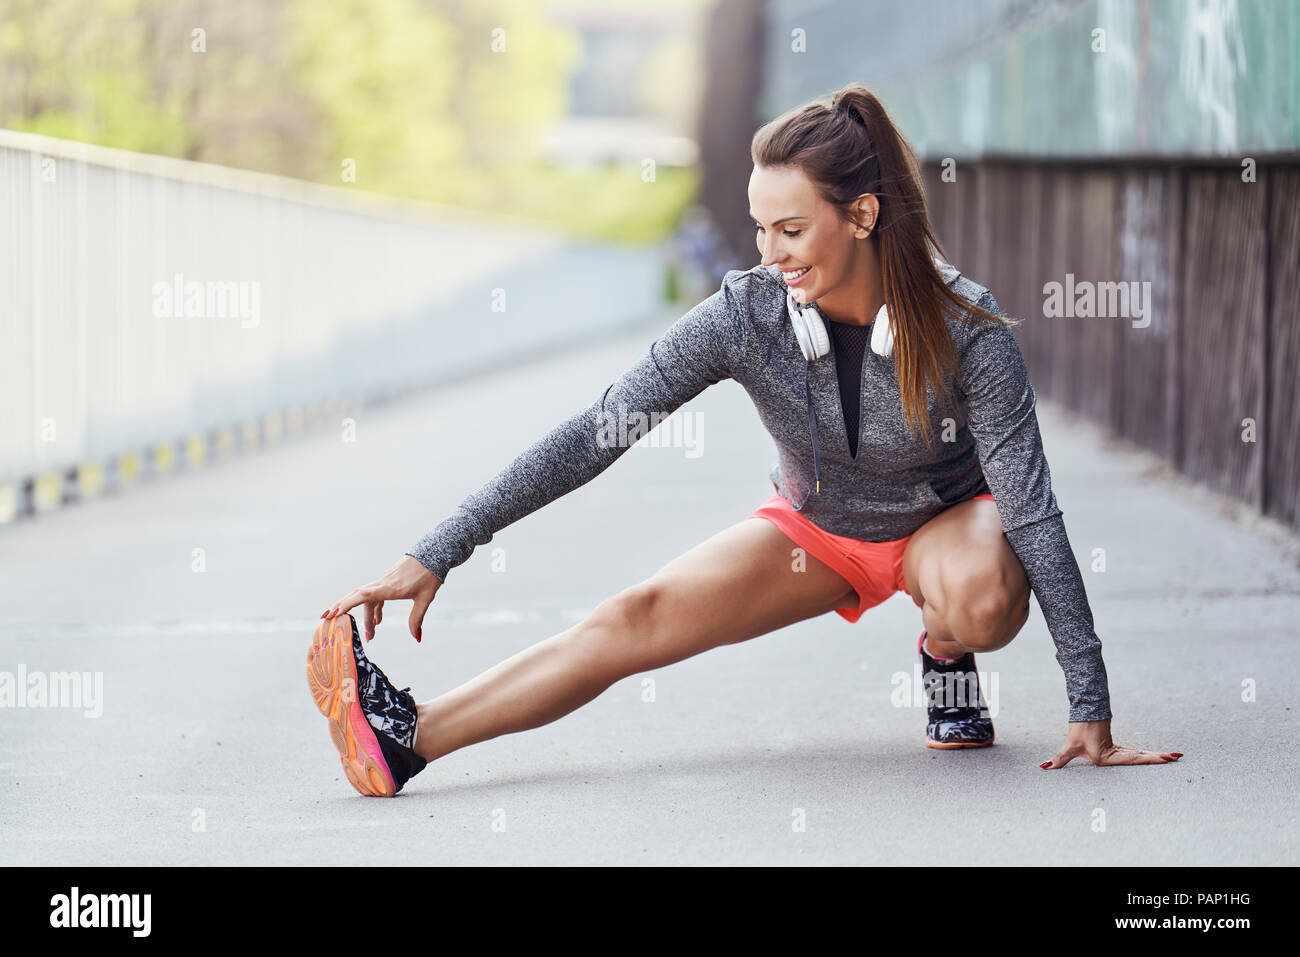 Female runner stretching legs during urban workout Stock Photo - Alamy